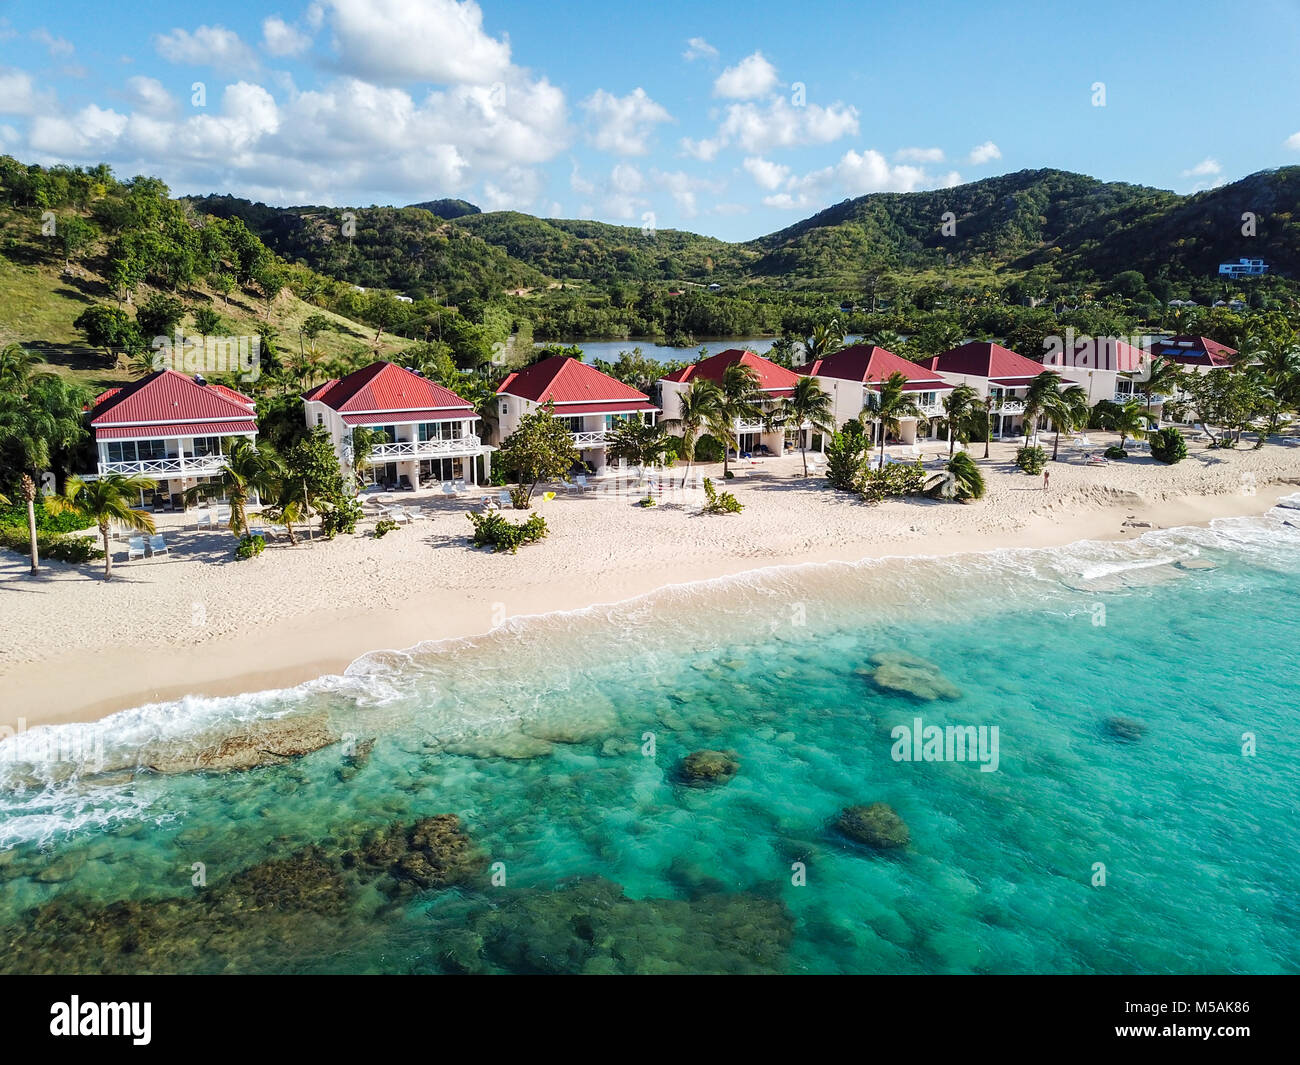 Galley Bay Beach Resort and Spa, Antigua Banque D'Images